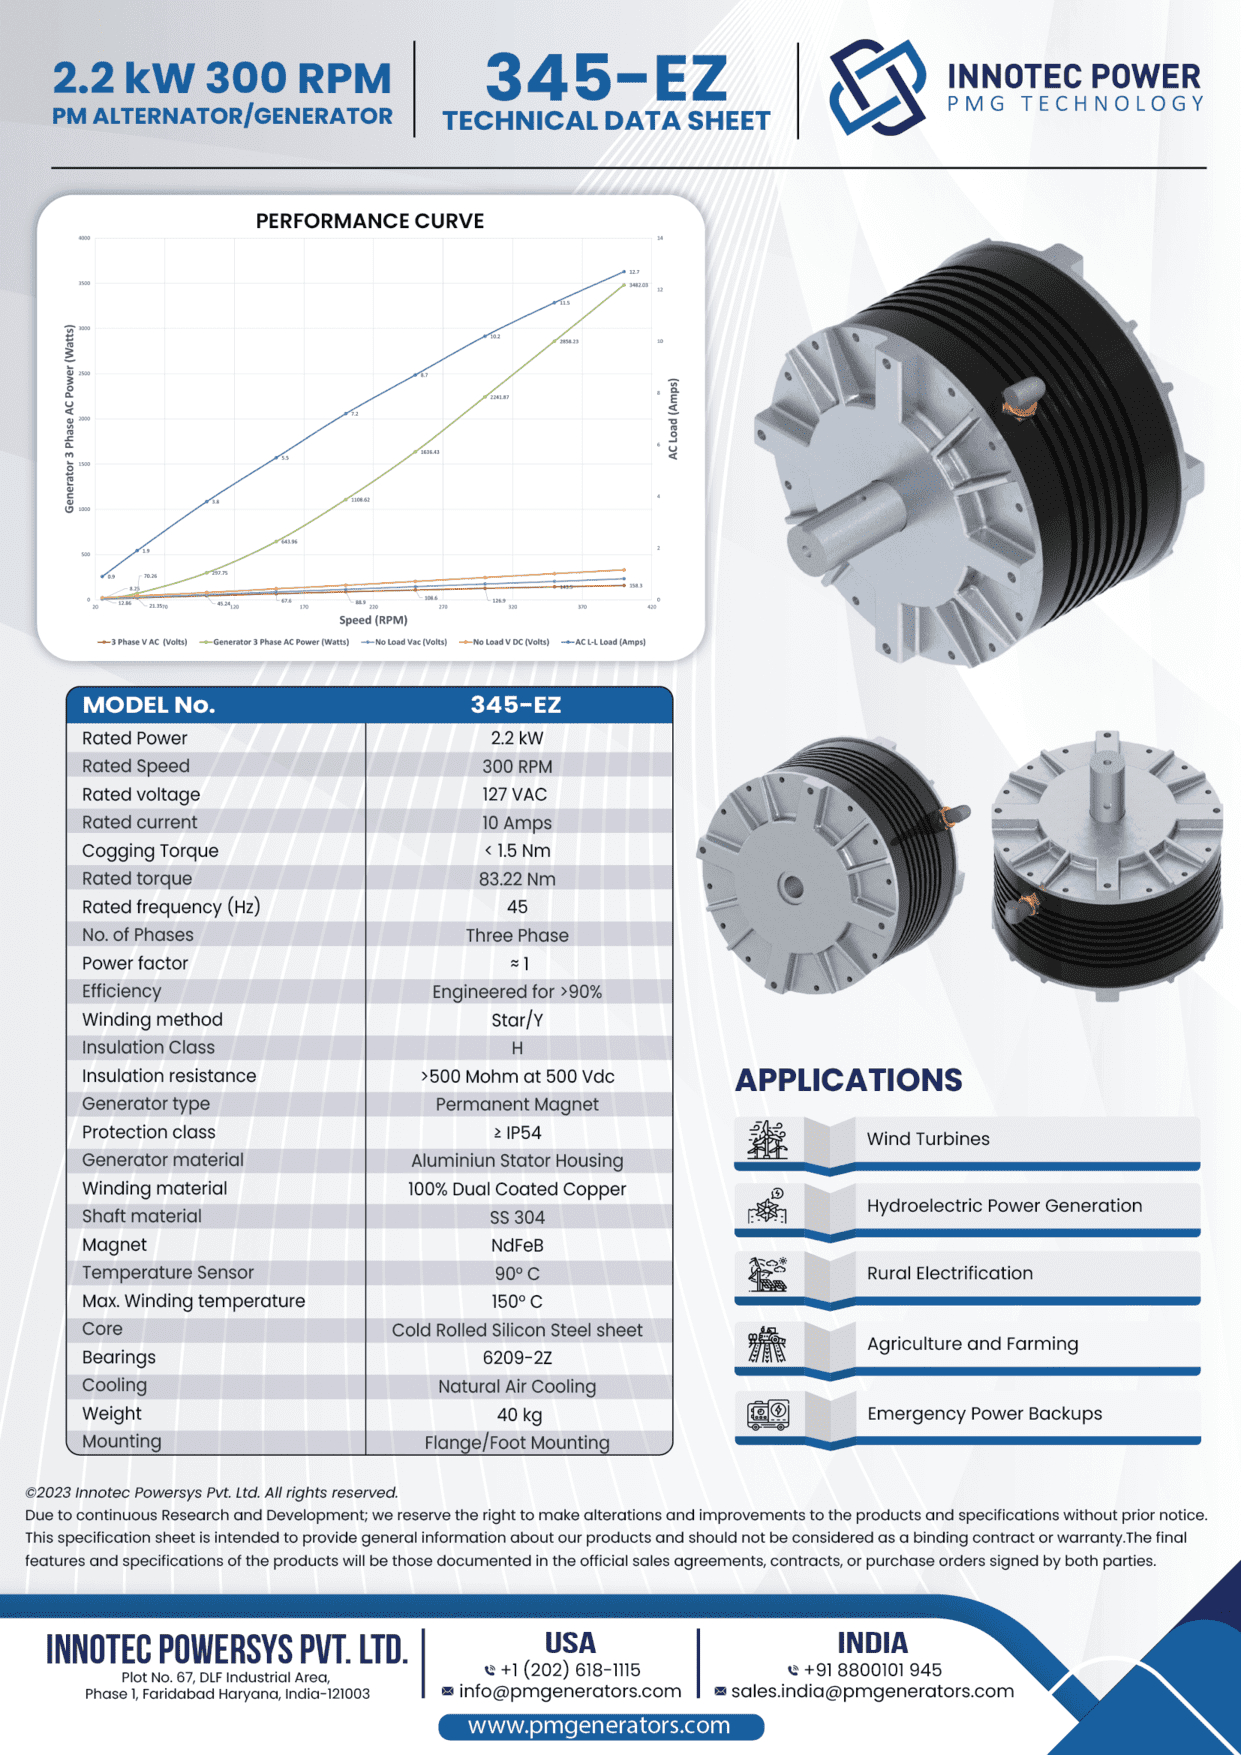 Data sheet of our 2kW Alternator for Wind Turbine applications at 300 RPM